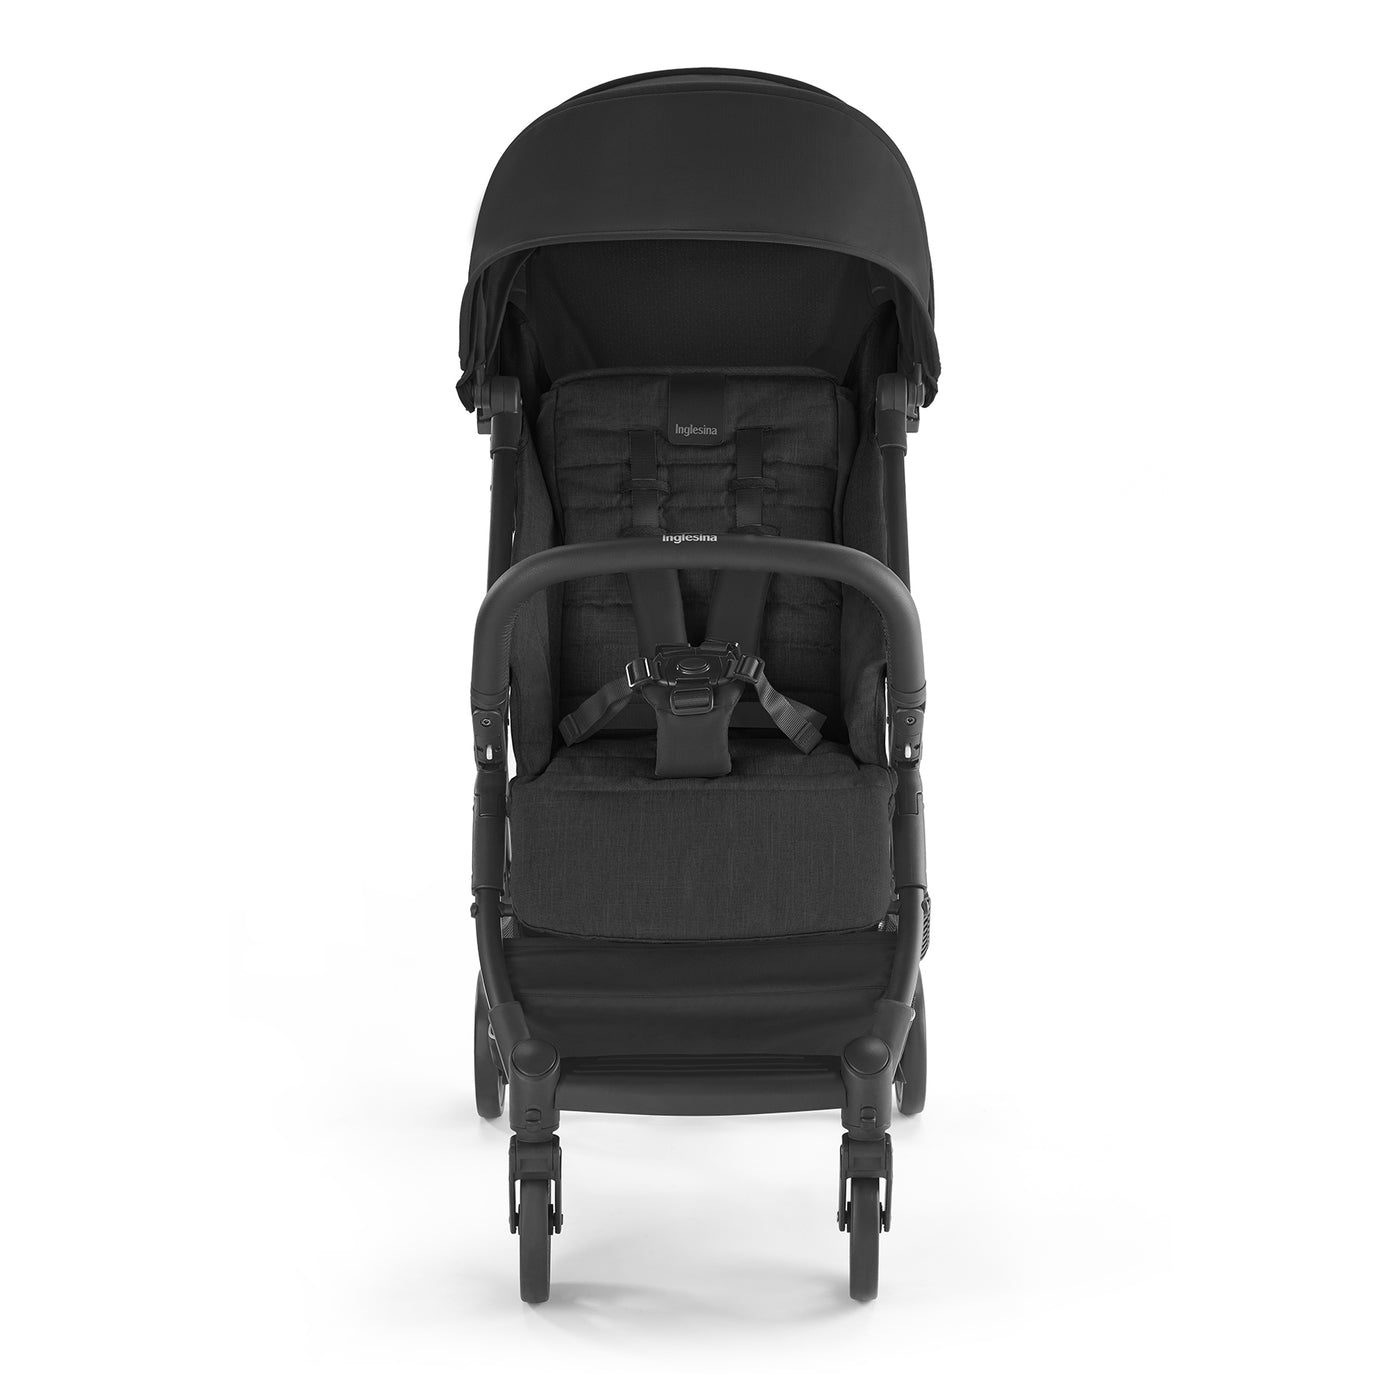 Travel with Kids: Check out the @Inglesina USA QUID 2 Stroller! The pe